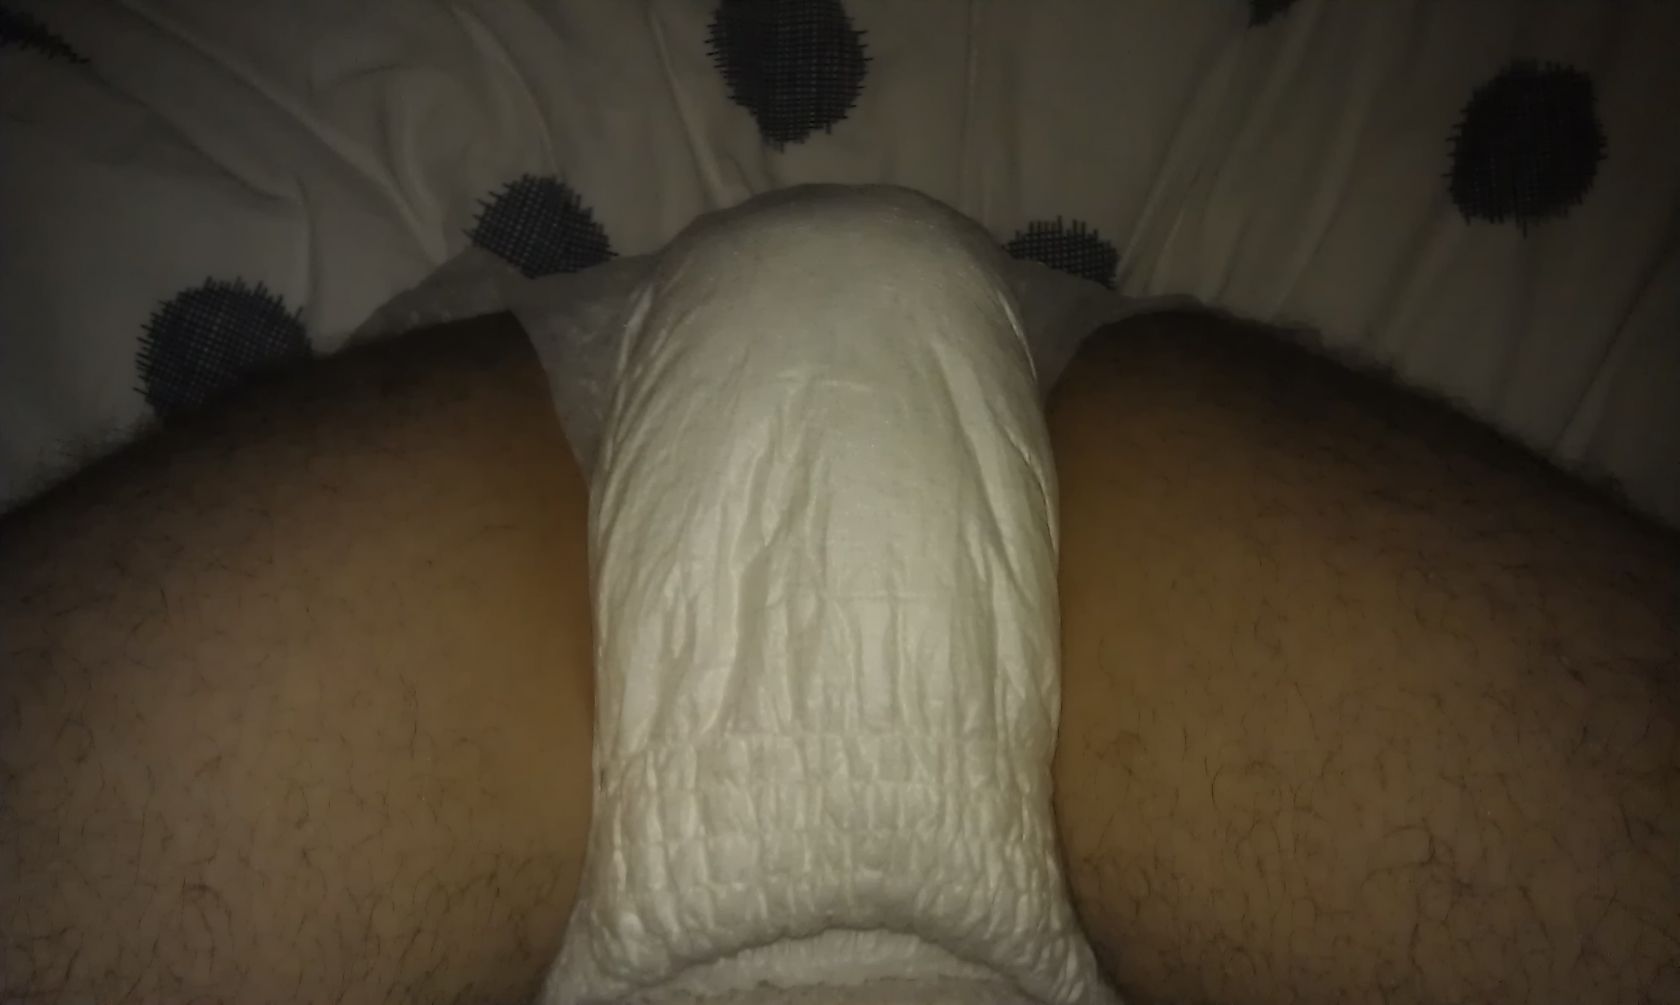 Diaper with cucumber in the ass